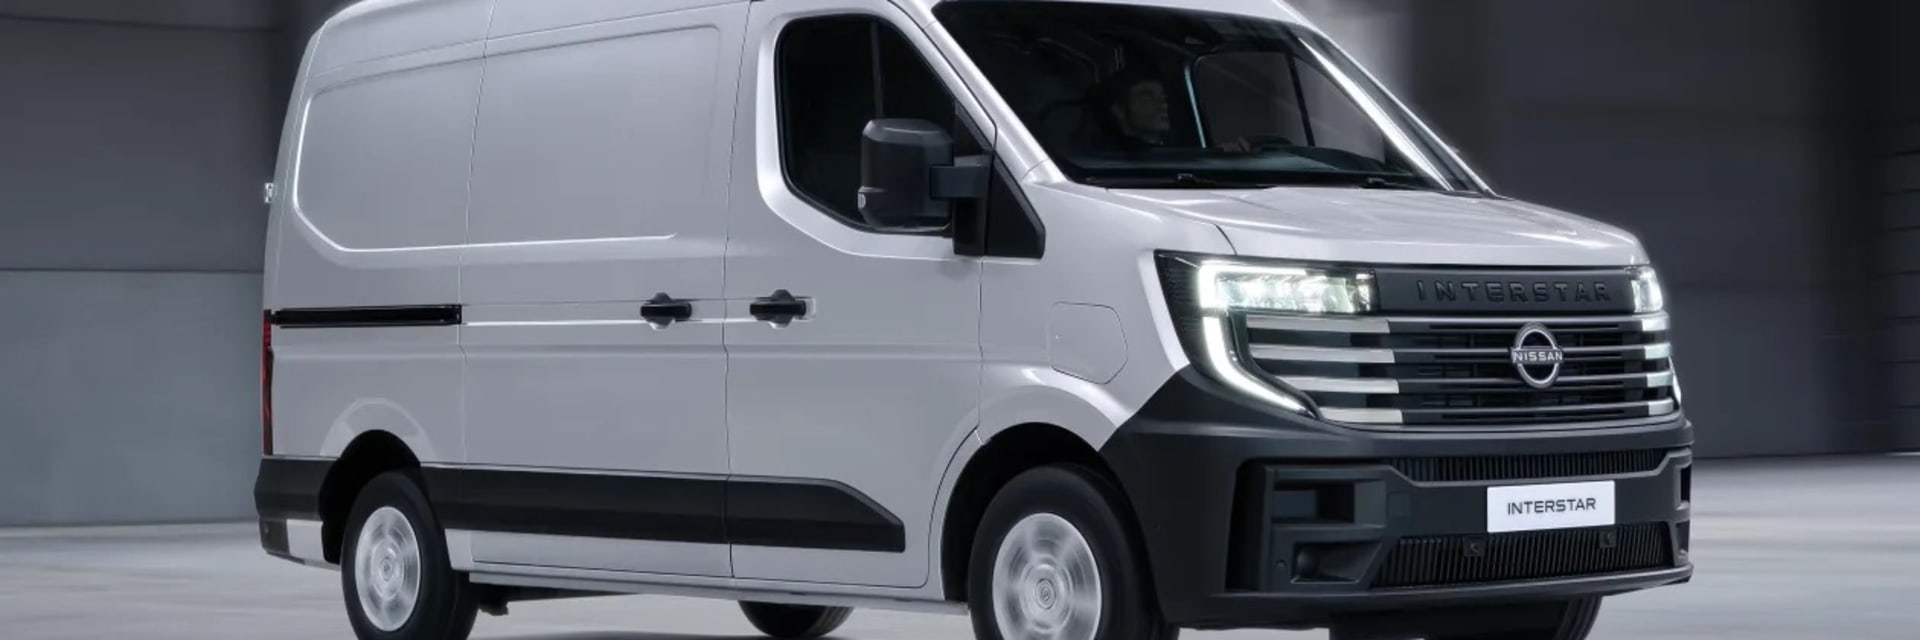 Introducing the All-New Nissan Interstar